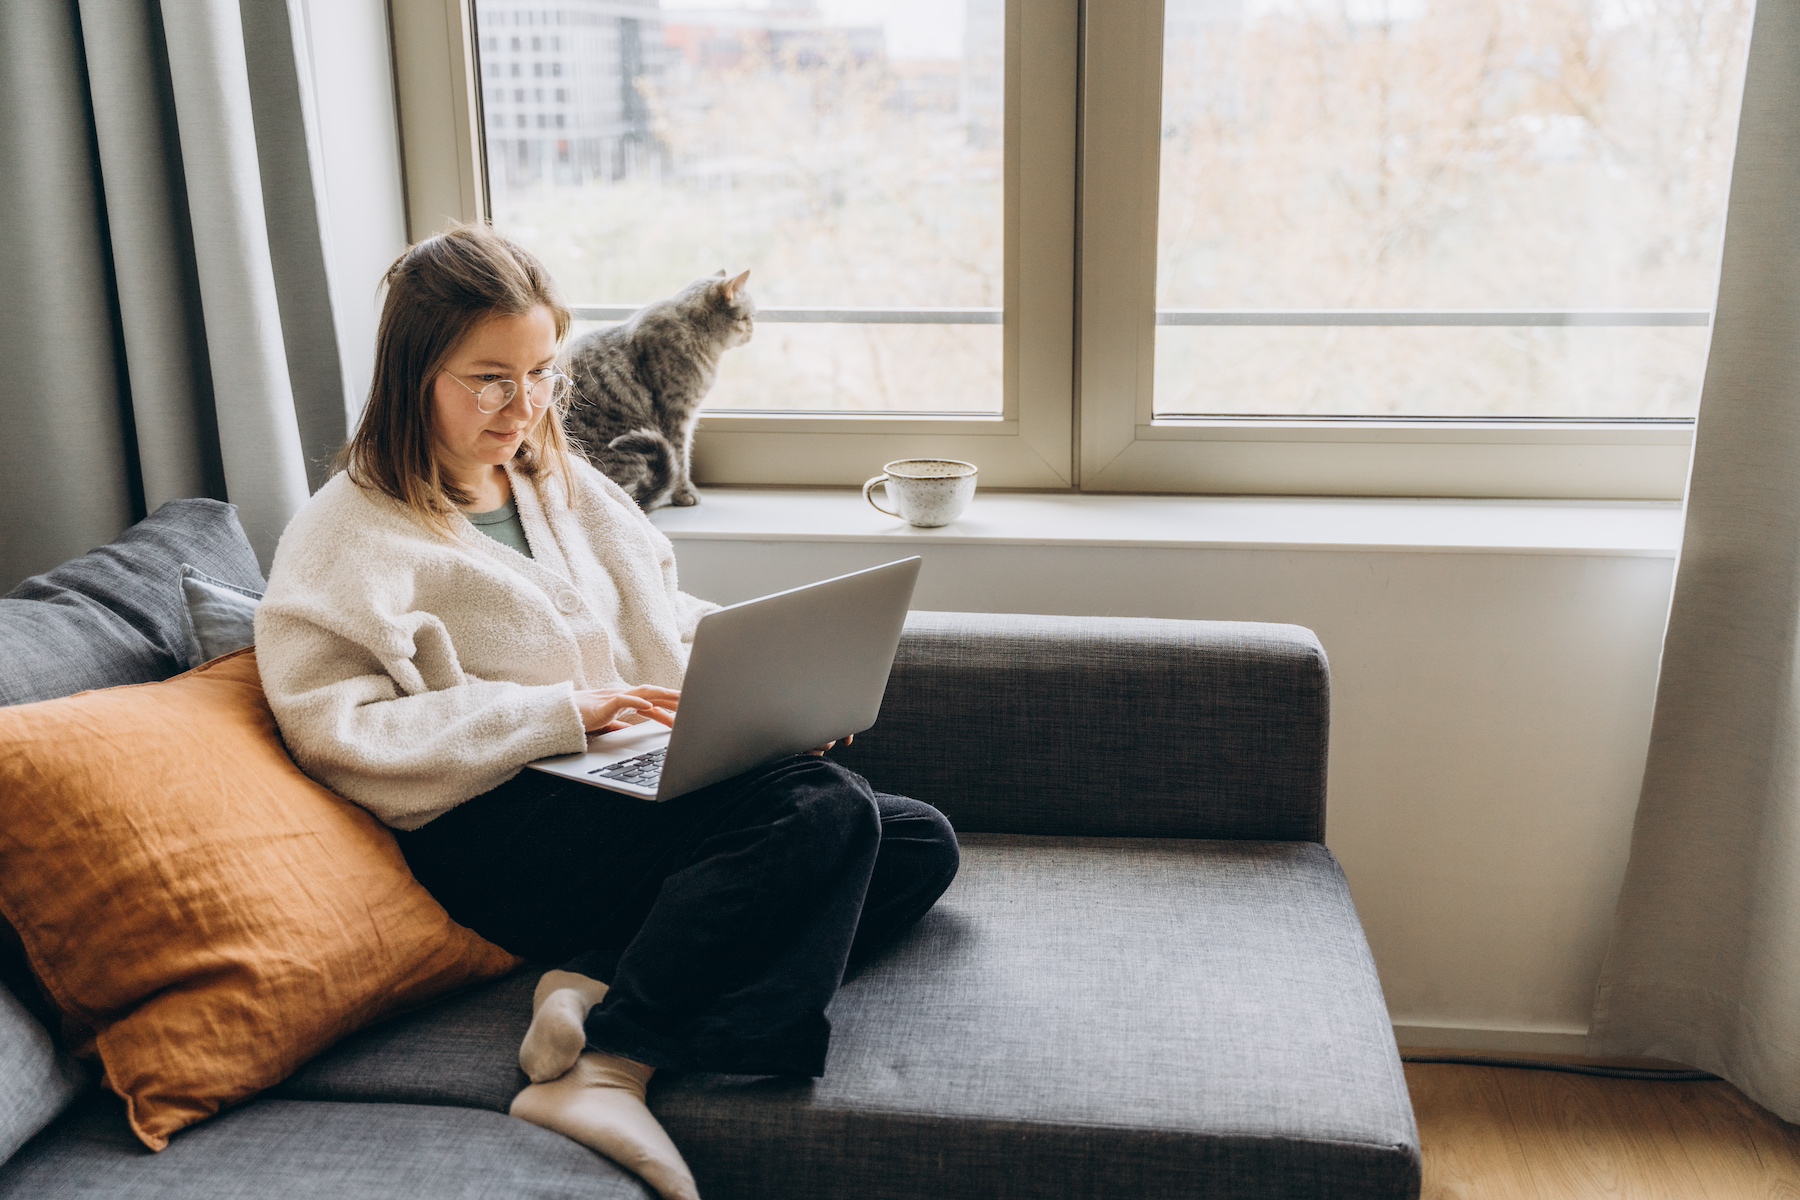 A woman sits on the couch typing on a laptop with her cat behind her